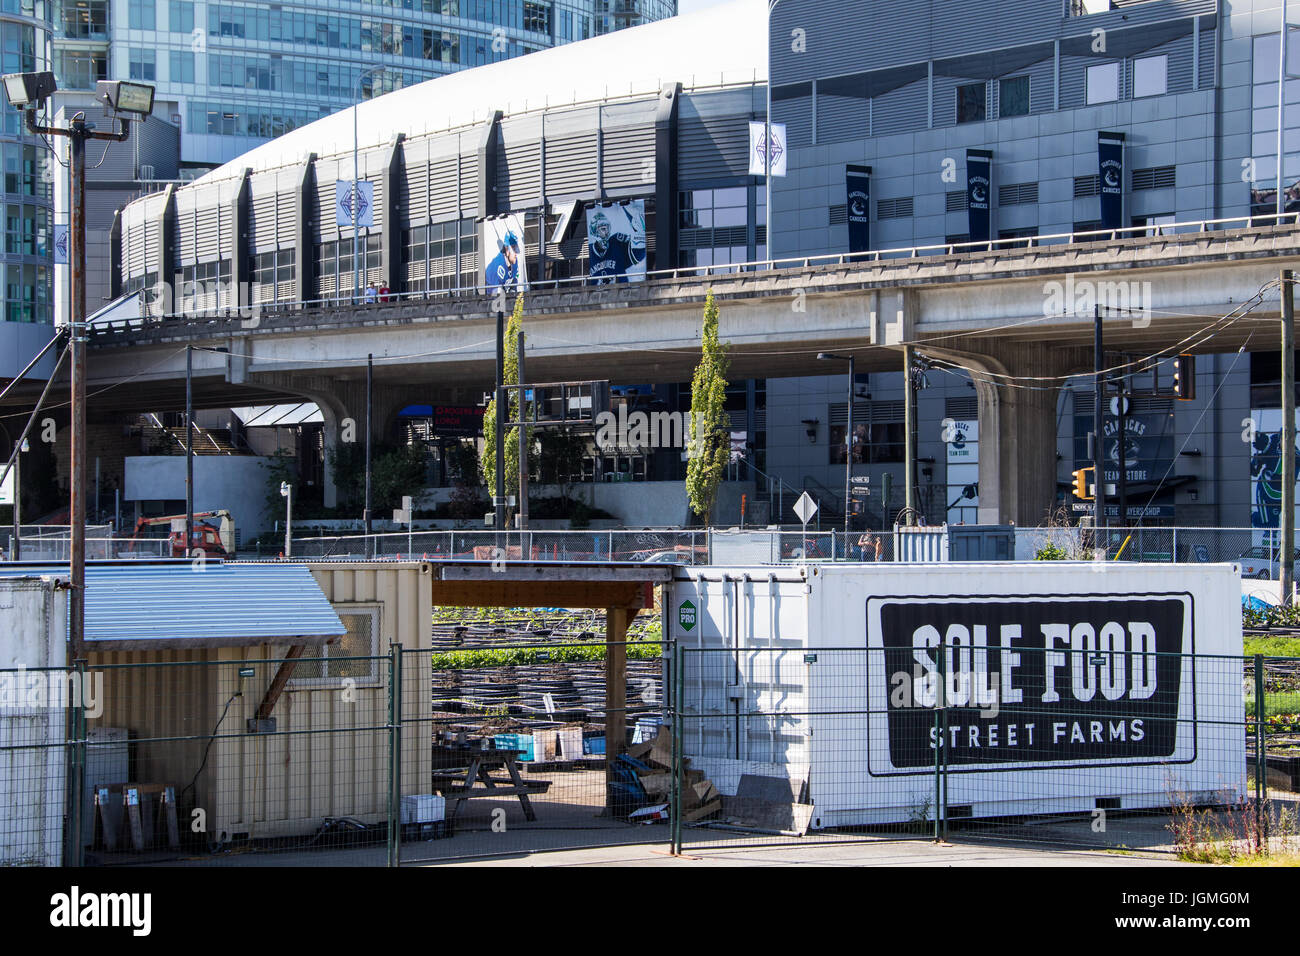 Sole Food Street Farms transforms vacant urban land into areas that grow artisan quality fruits and vegetables, Vancouver, British Columbia, Canada Stock Photo